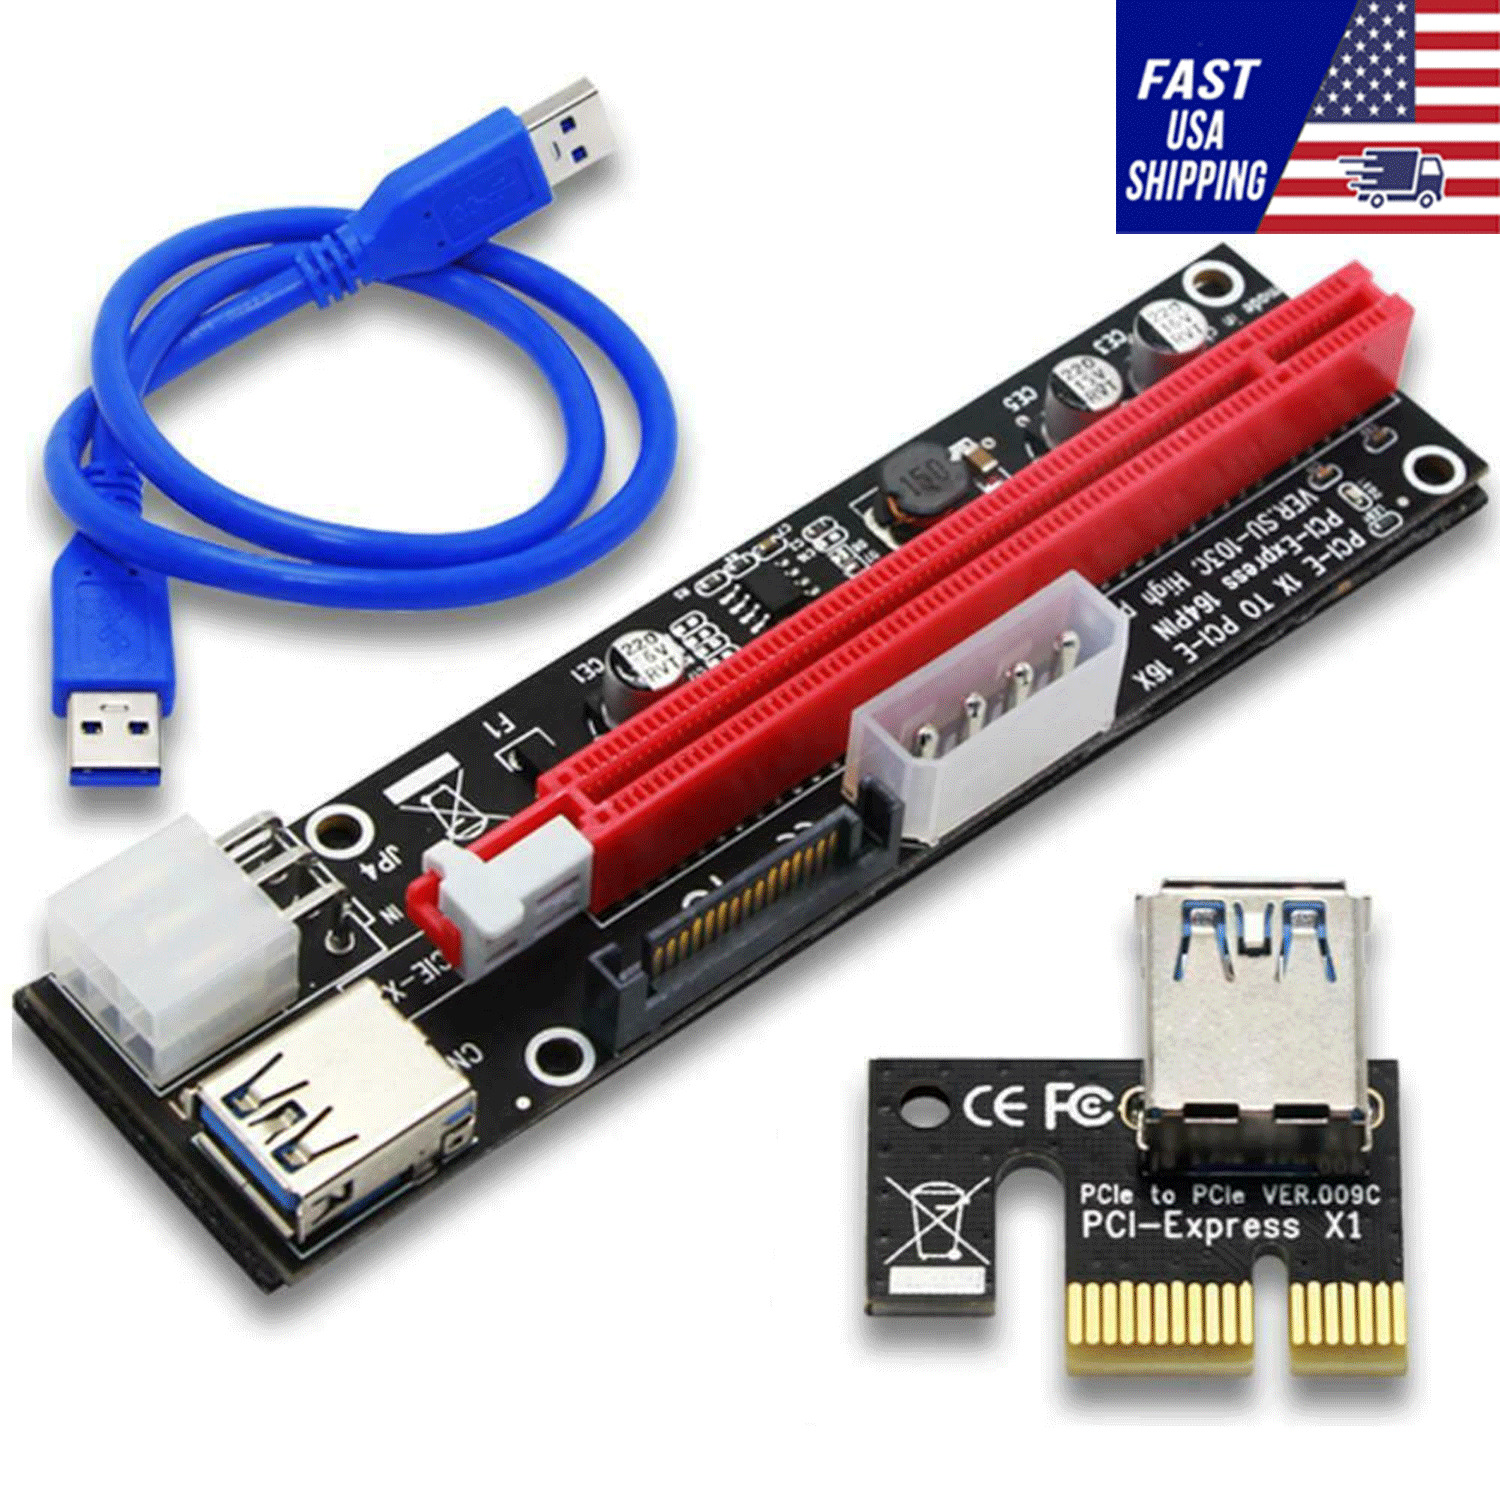 PCI-E 1x to 16x Powered USB3.0 GPU Riser Extender Adapter Card Board Cable